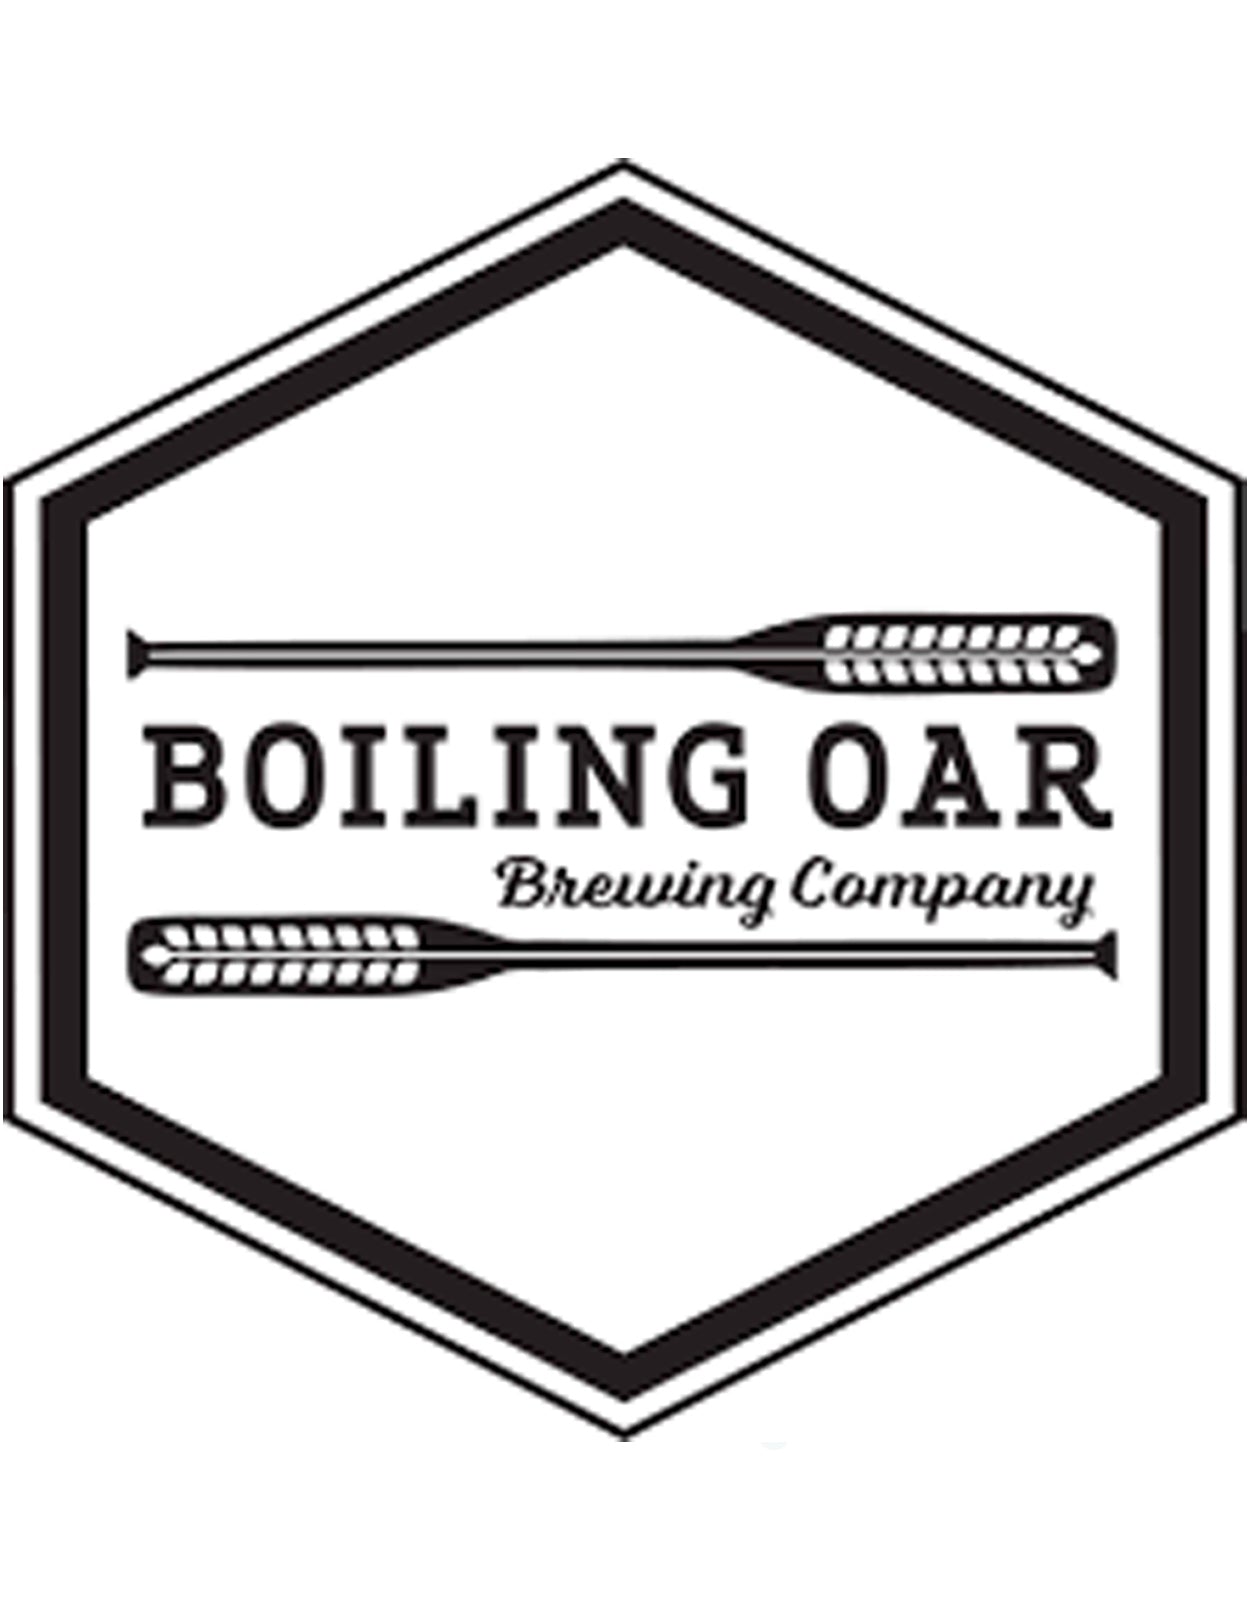 Boiling Oar Citra Blonde 473 ml - 4 Cans